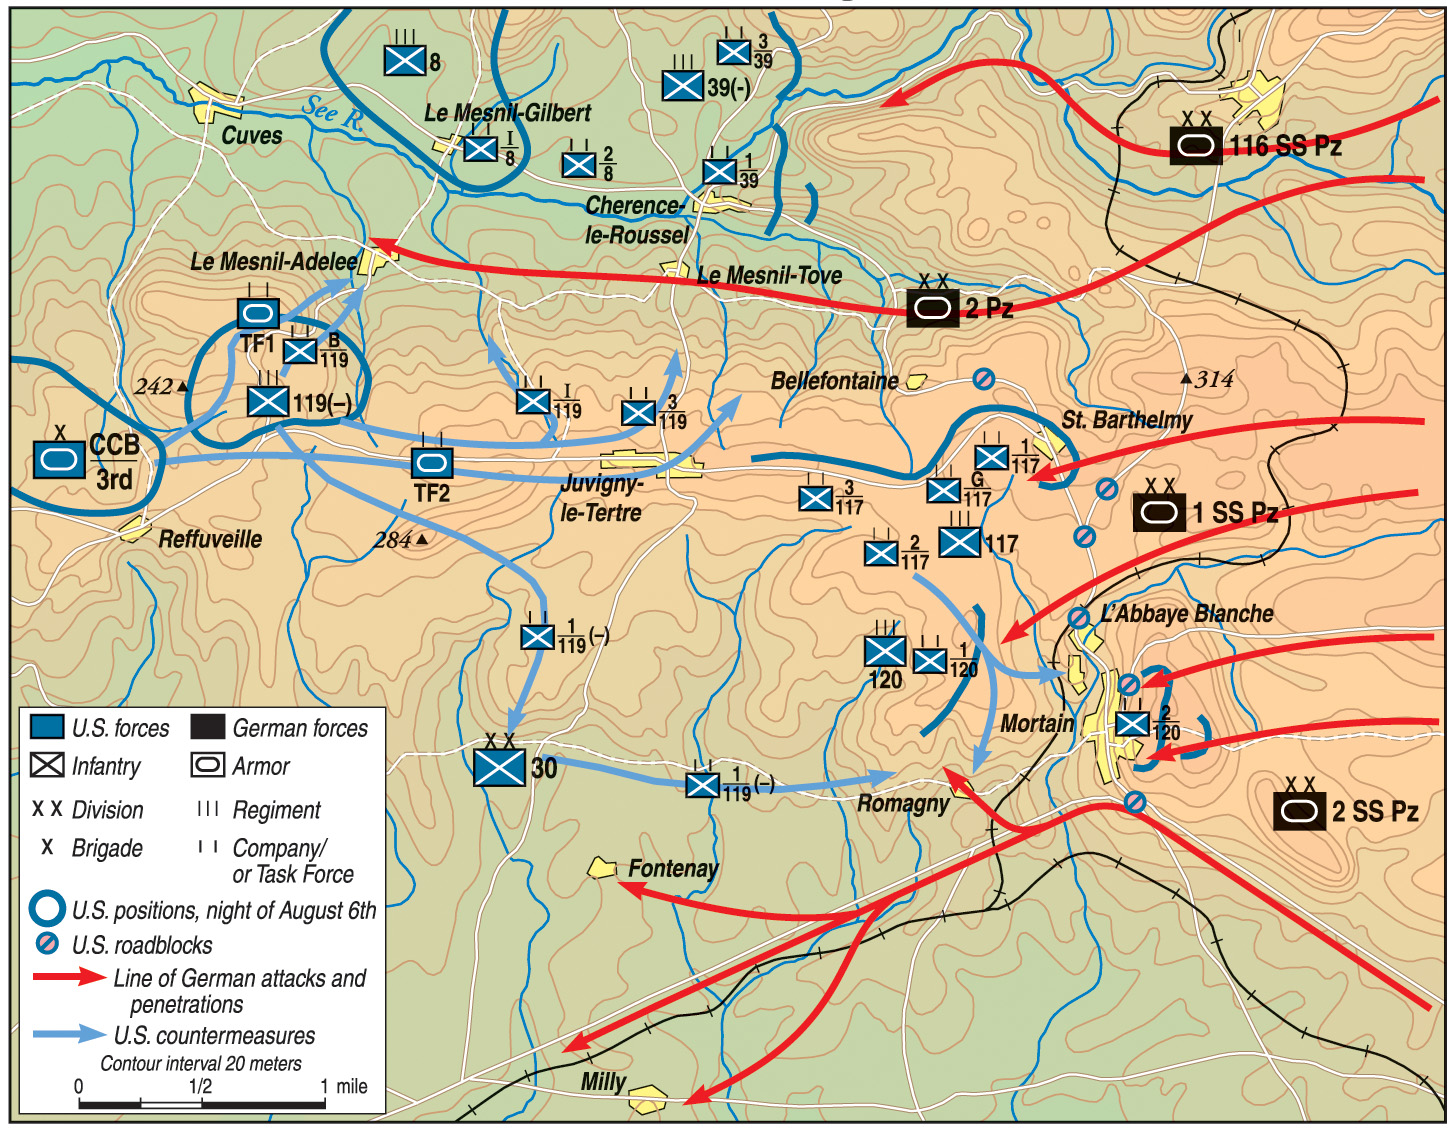 The German counterstroke of August 1944 included four of the finest armored divisions of the SS and Wehrmacht. The heroic stand of the American 30th Infantry Division at Mortain doomed the offensive to failure.